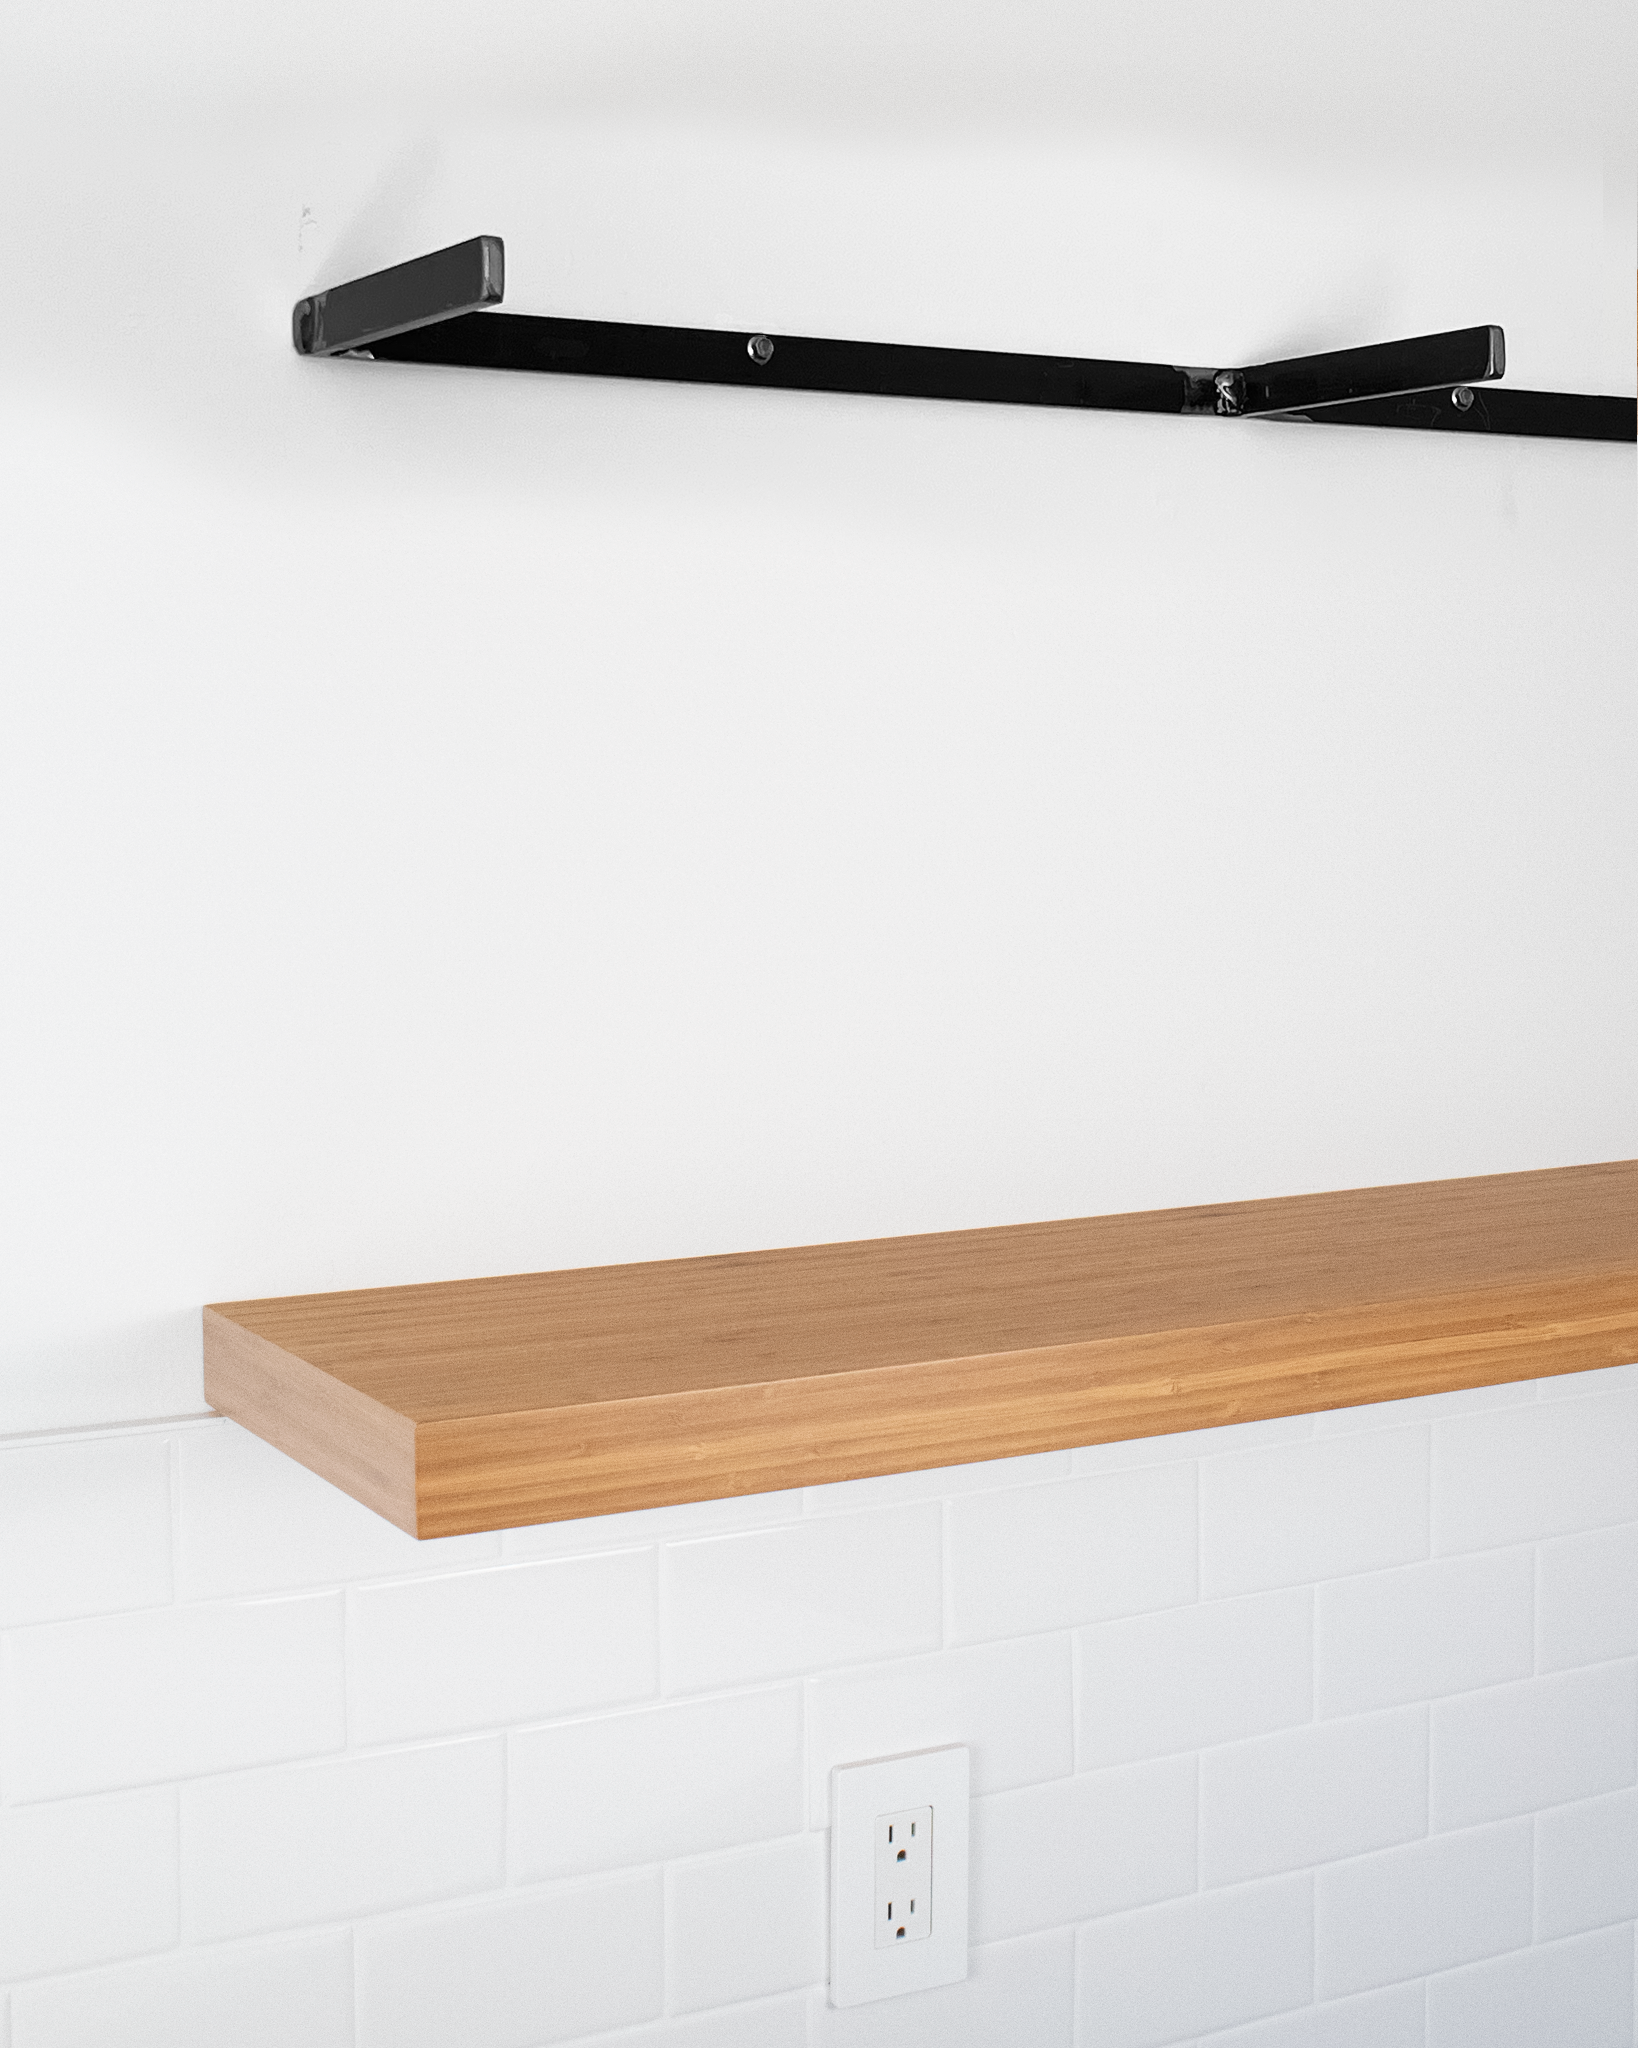 Bamboo Floating Shelves 1.75" thick